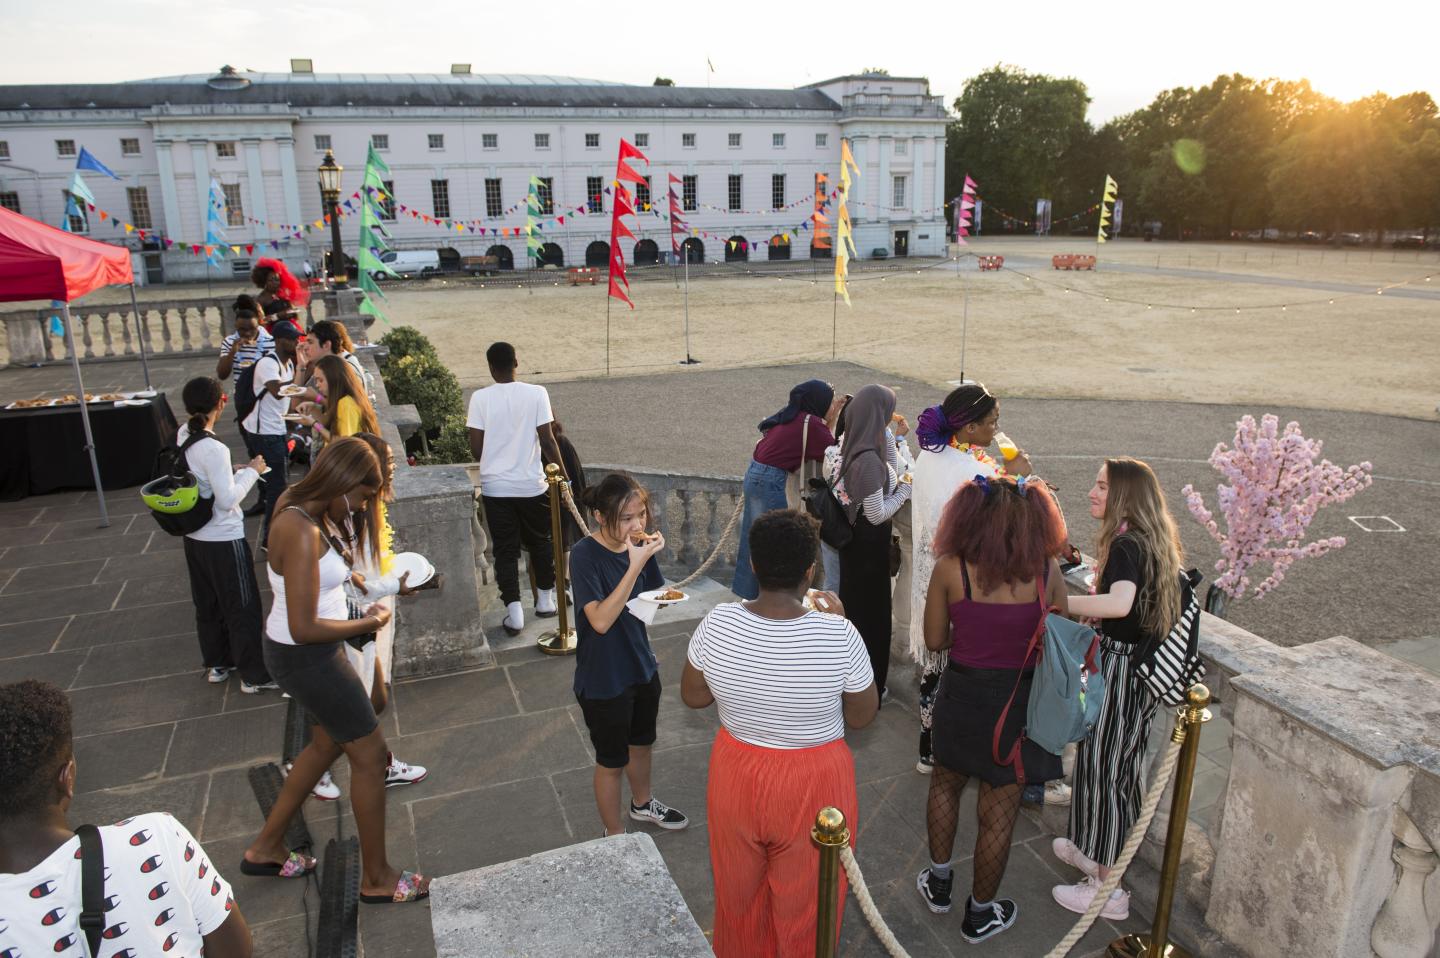 A group of young people gathered outside the Queen's house during the event